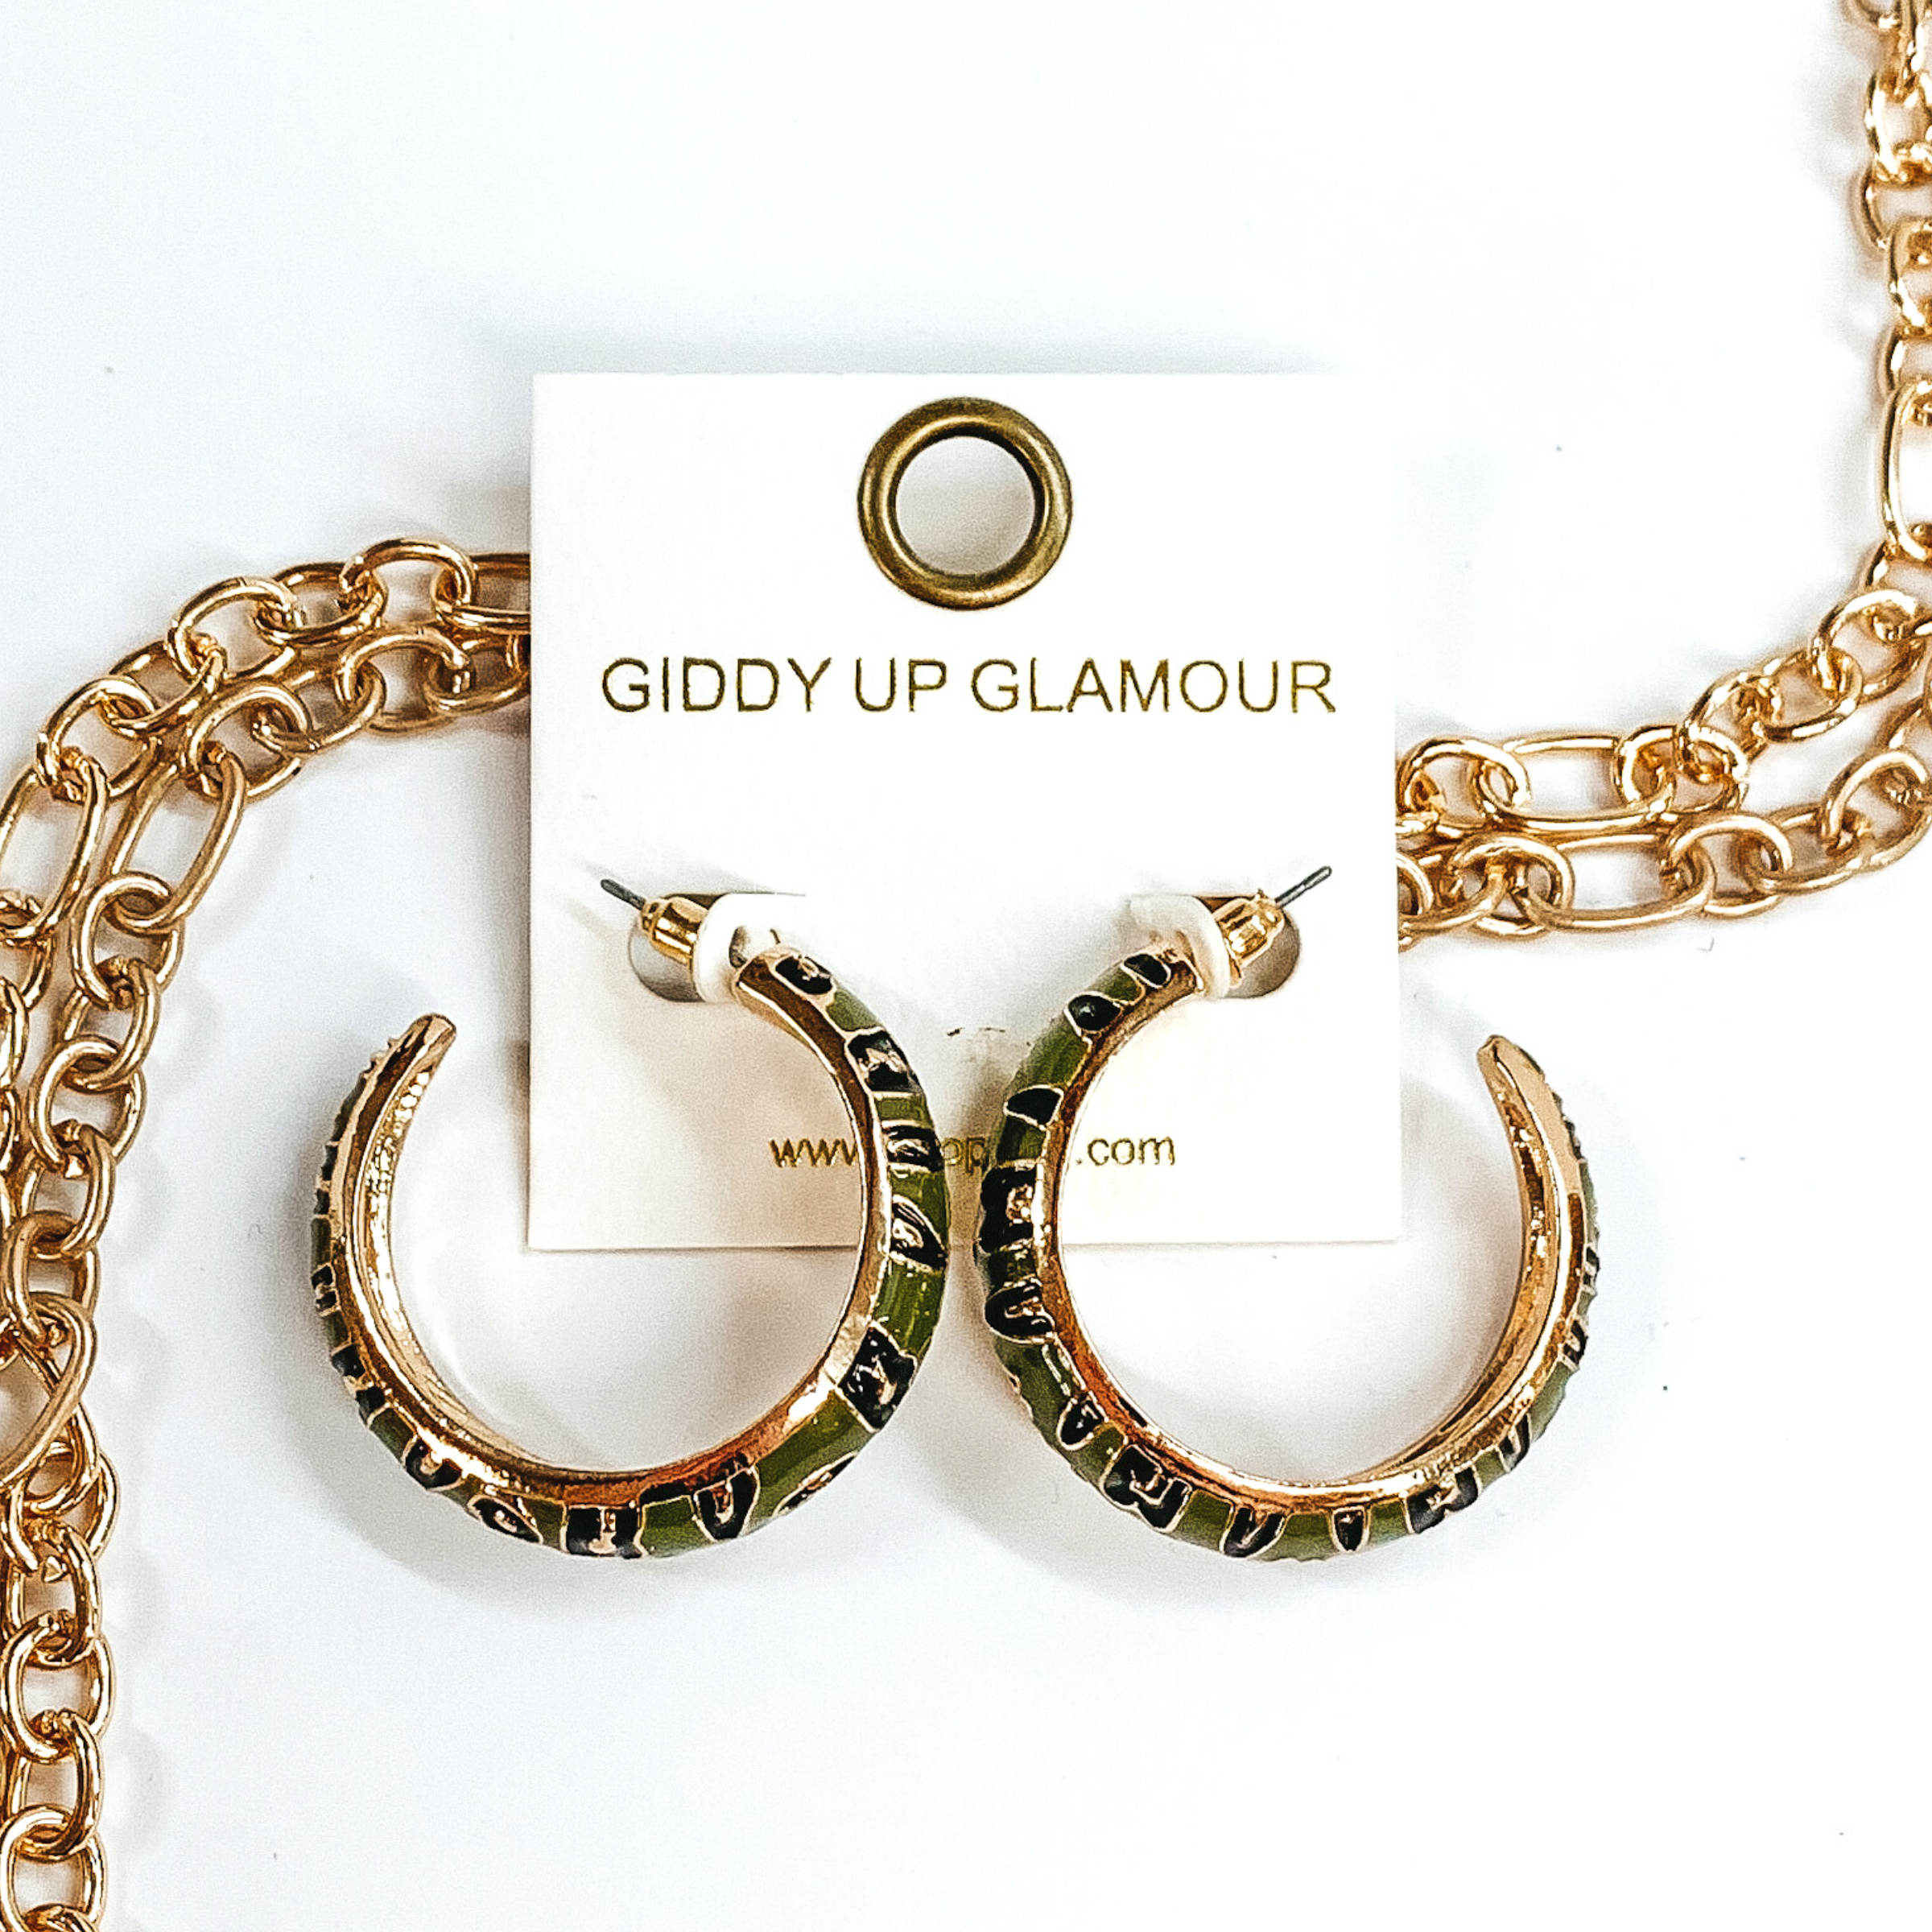 Large, gold outline, olive green hoop earrings with black and gold leopard print.These earrings are pictured on a white earrings holder, laying on top of gold chains on a white background.